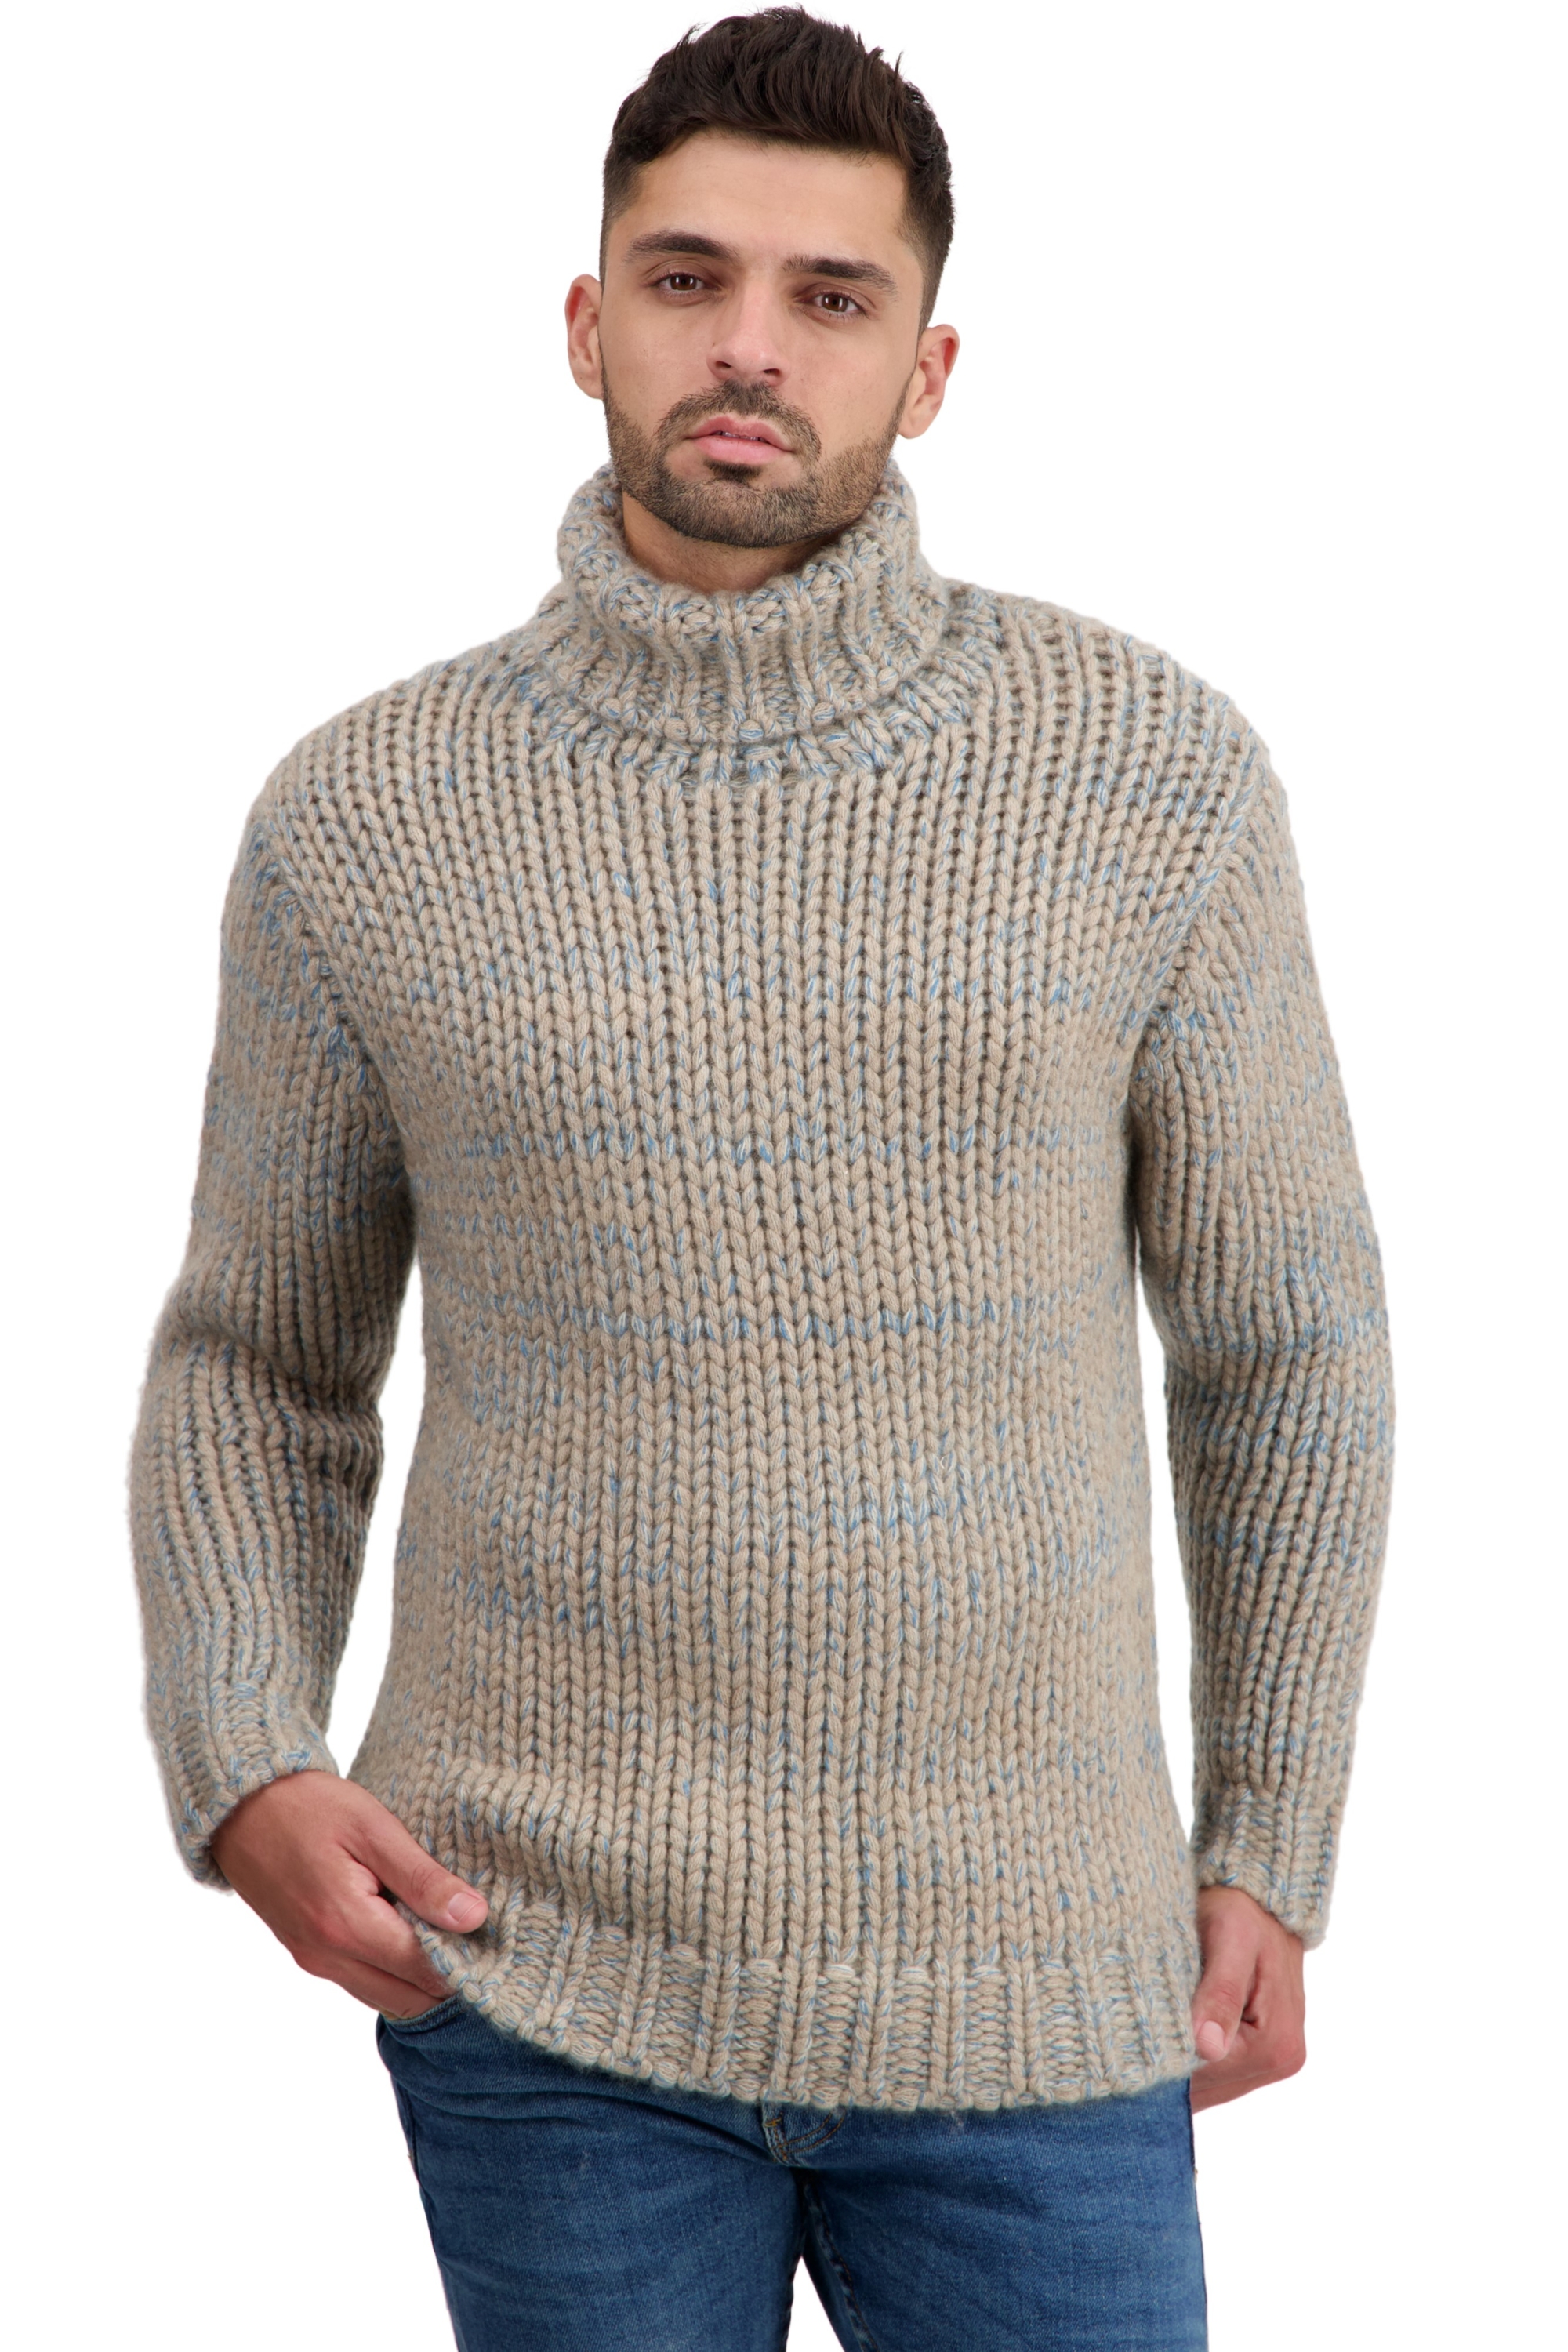 Cashmere men chunky sweater togo natural brown manor blue natural beige 3xl